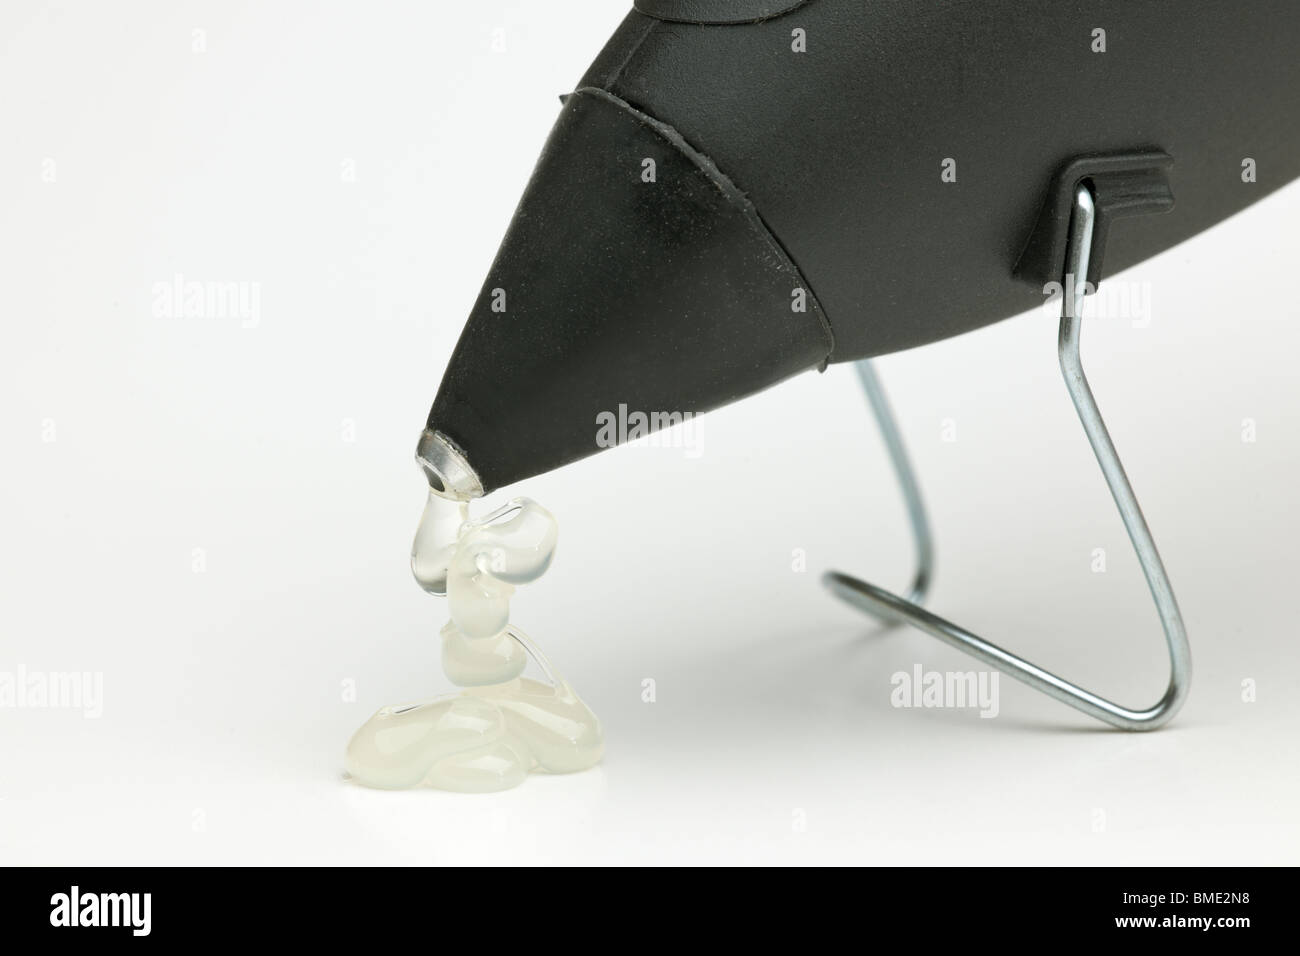 Hot glue pouring from the nozzle of a hot wax glue gun Stock Photo